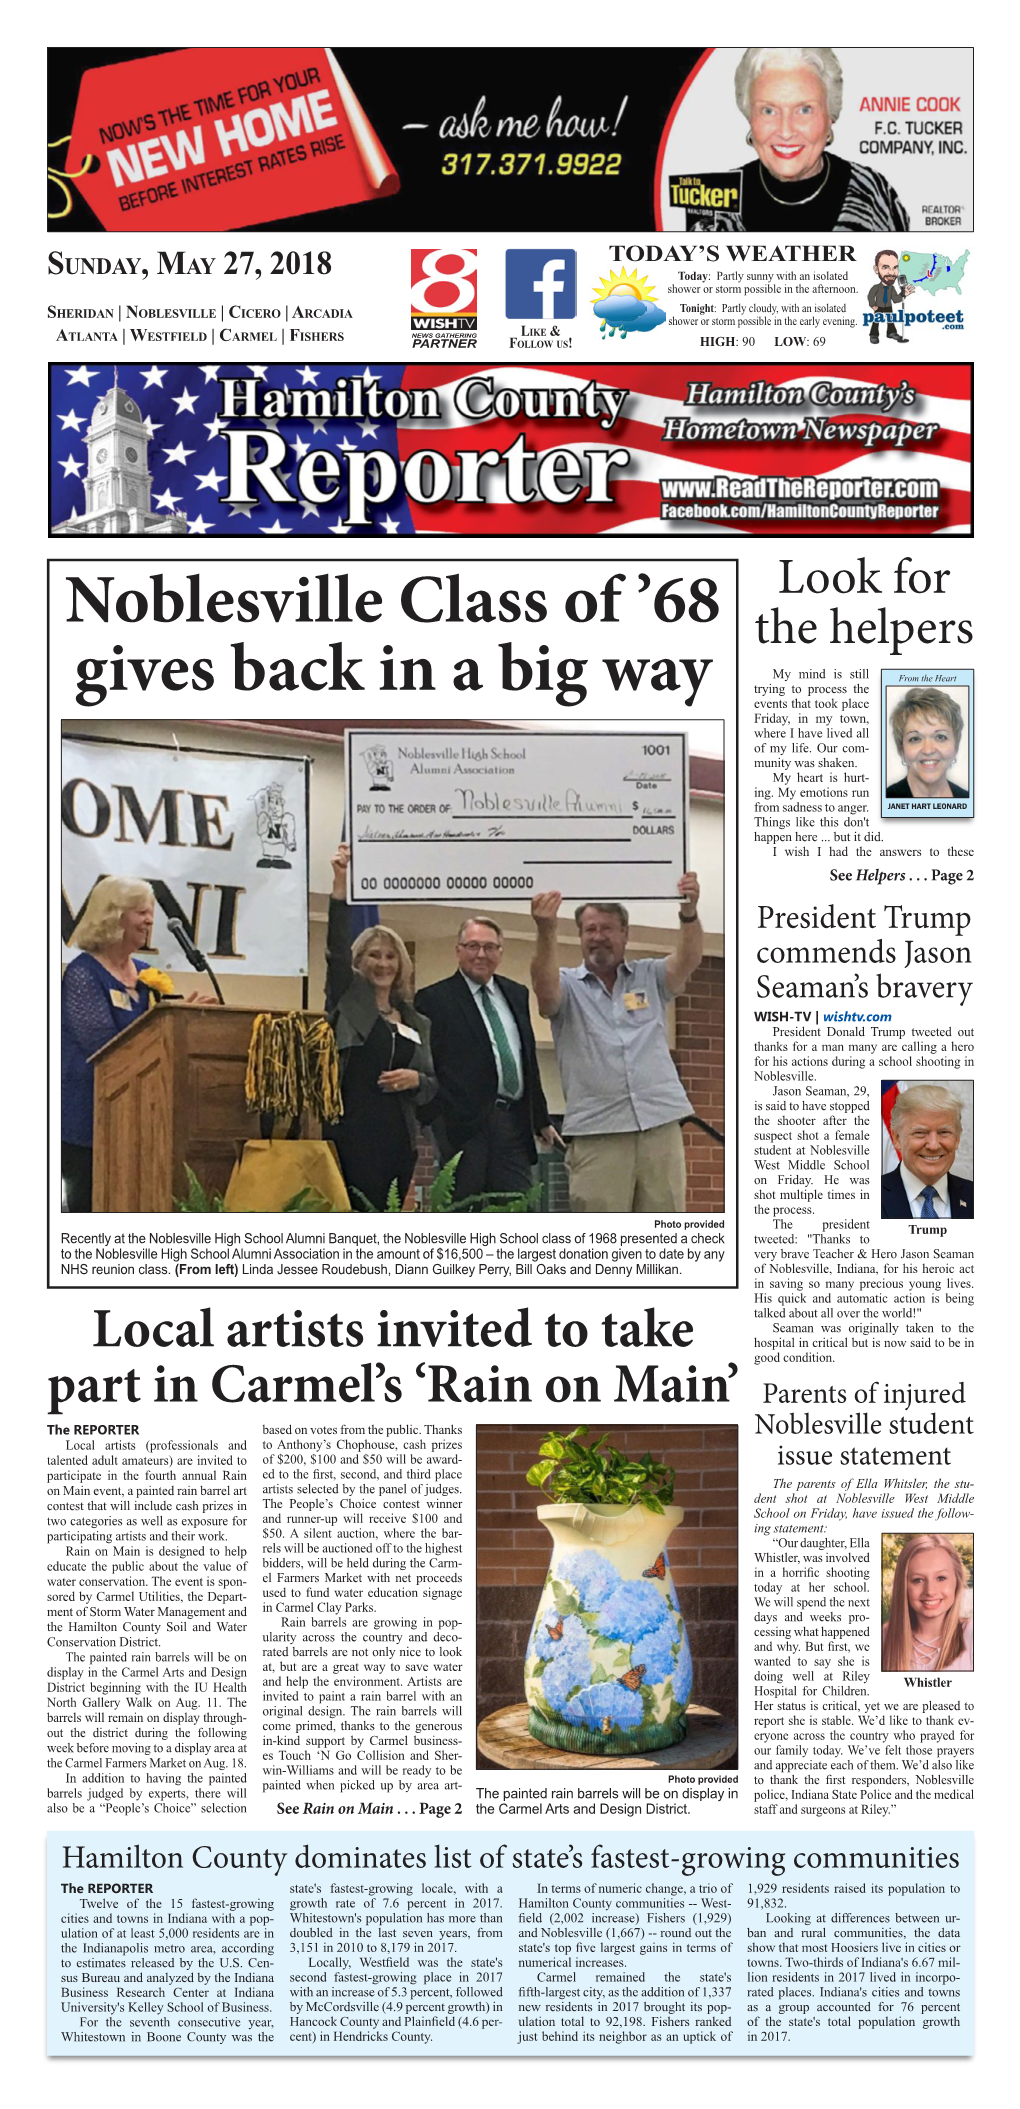 Noblesville Class of '68 Gives Back in a Big